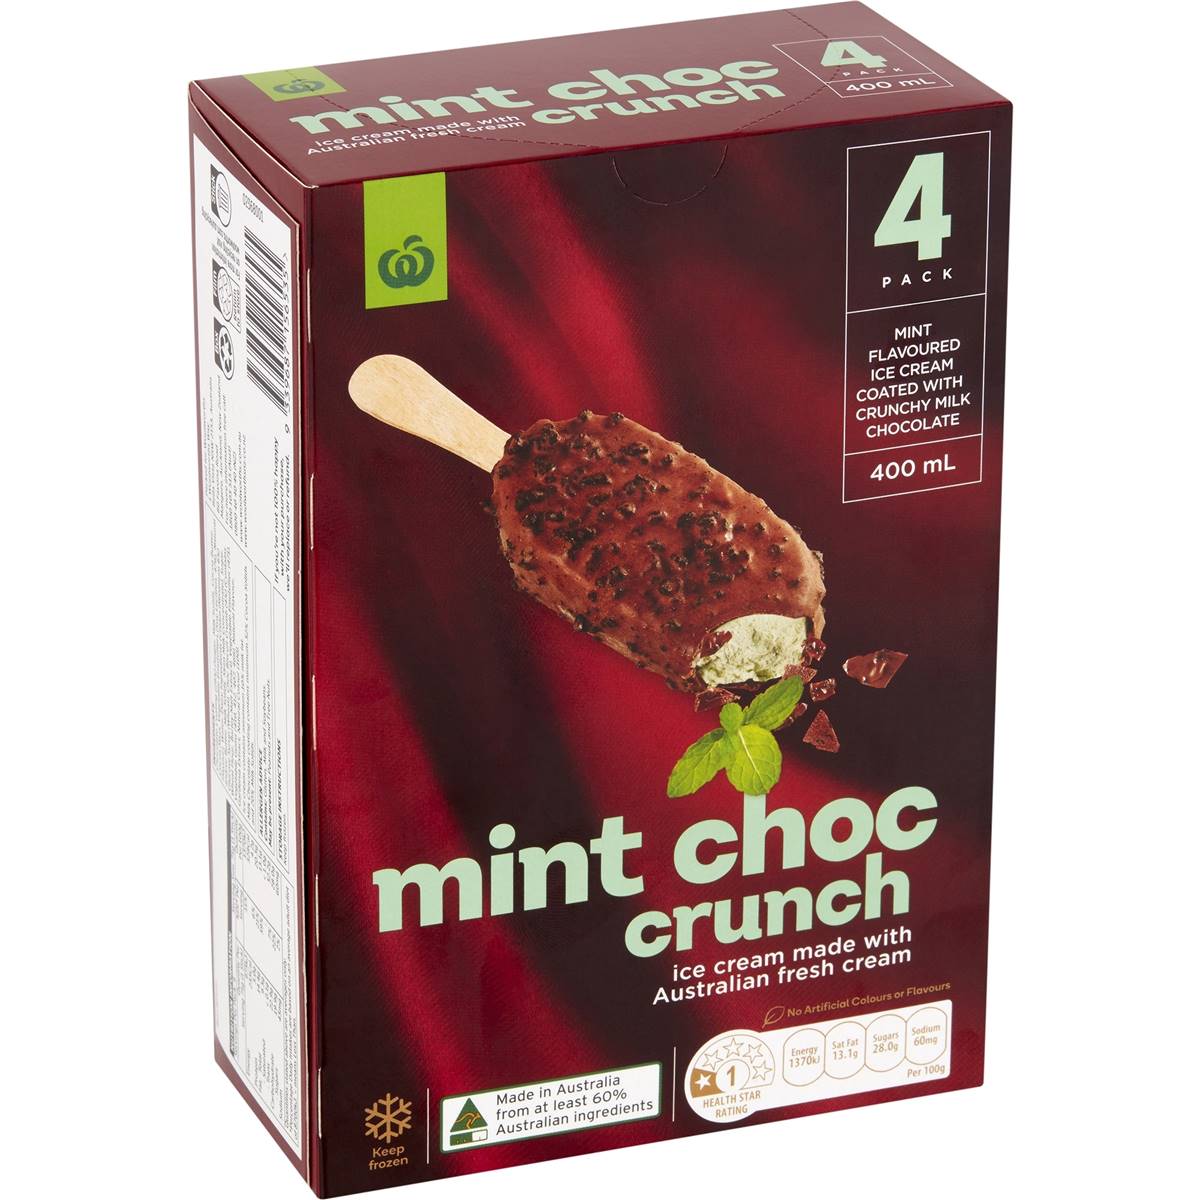 Calories in Woolworths Mint Choc Crunch Ice Cream